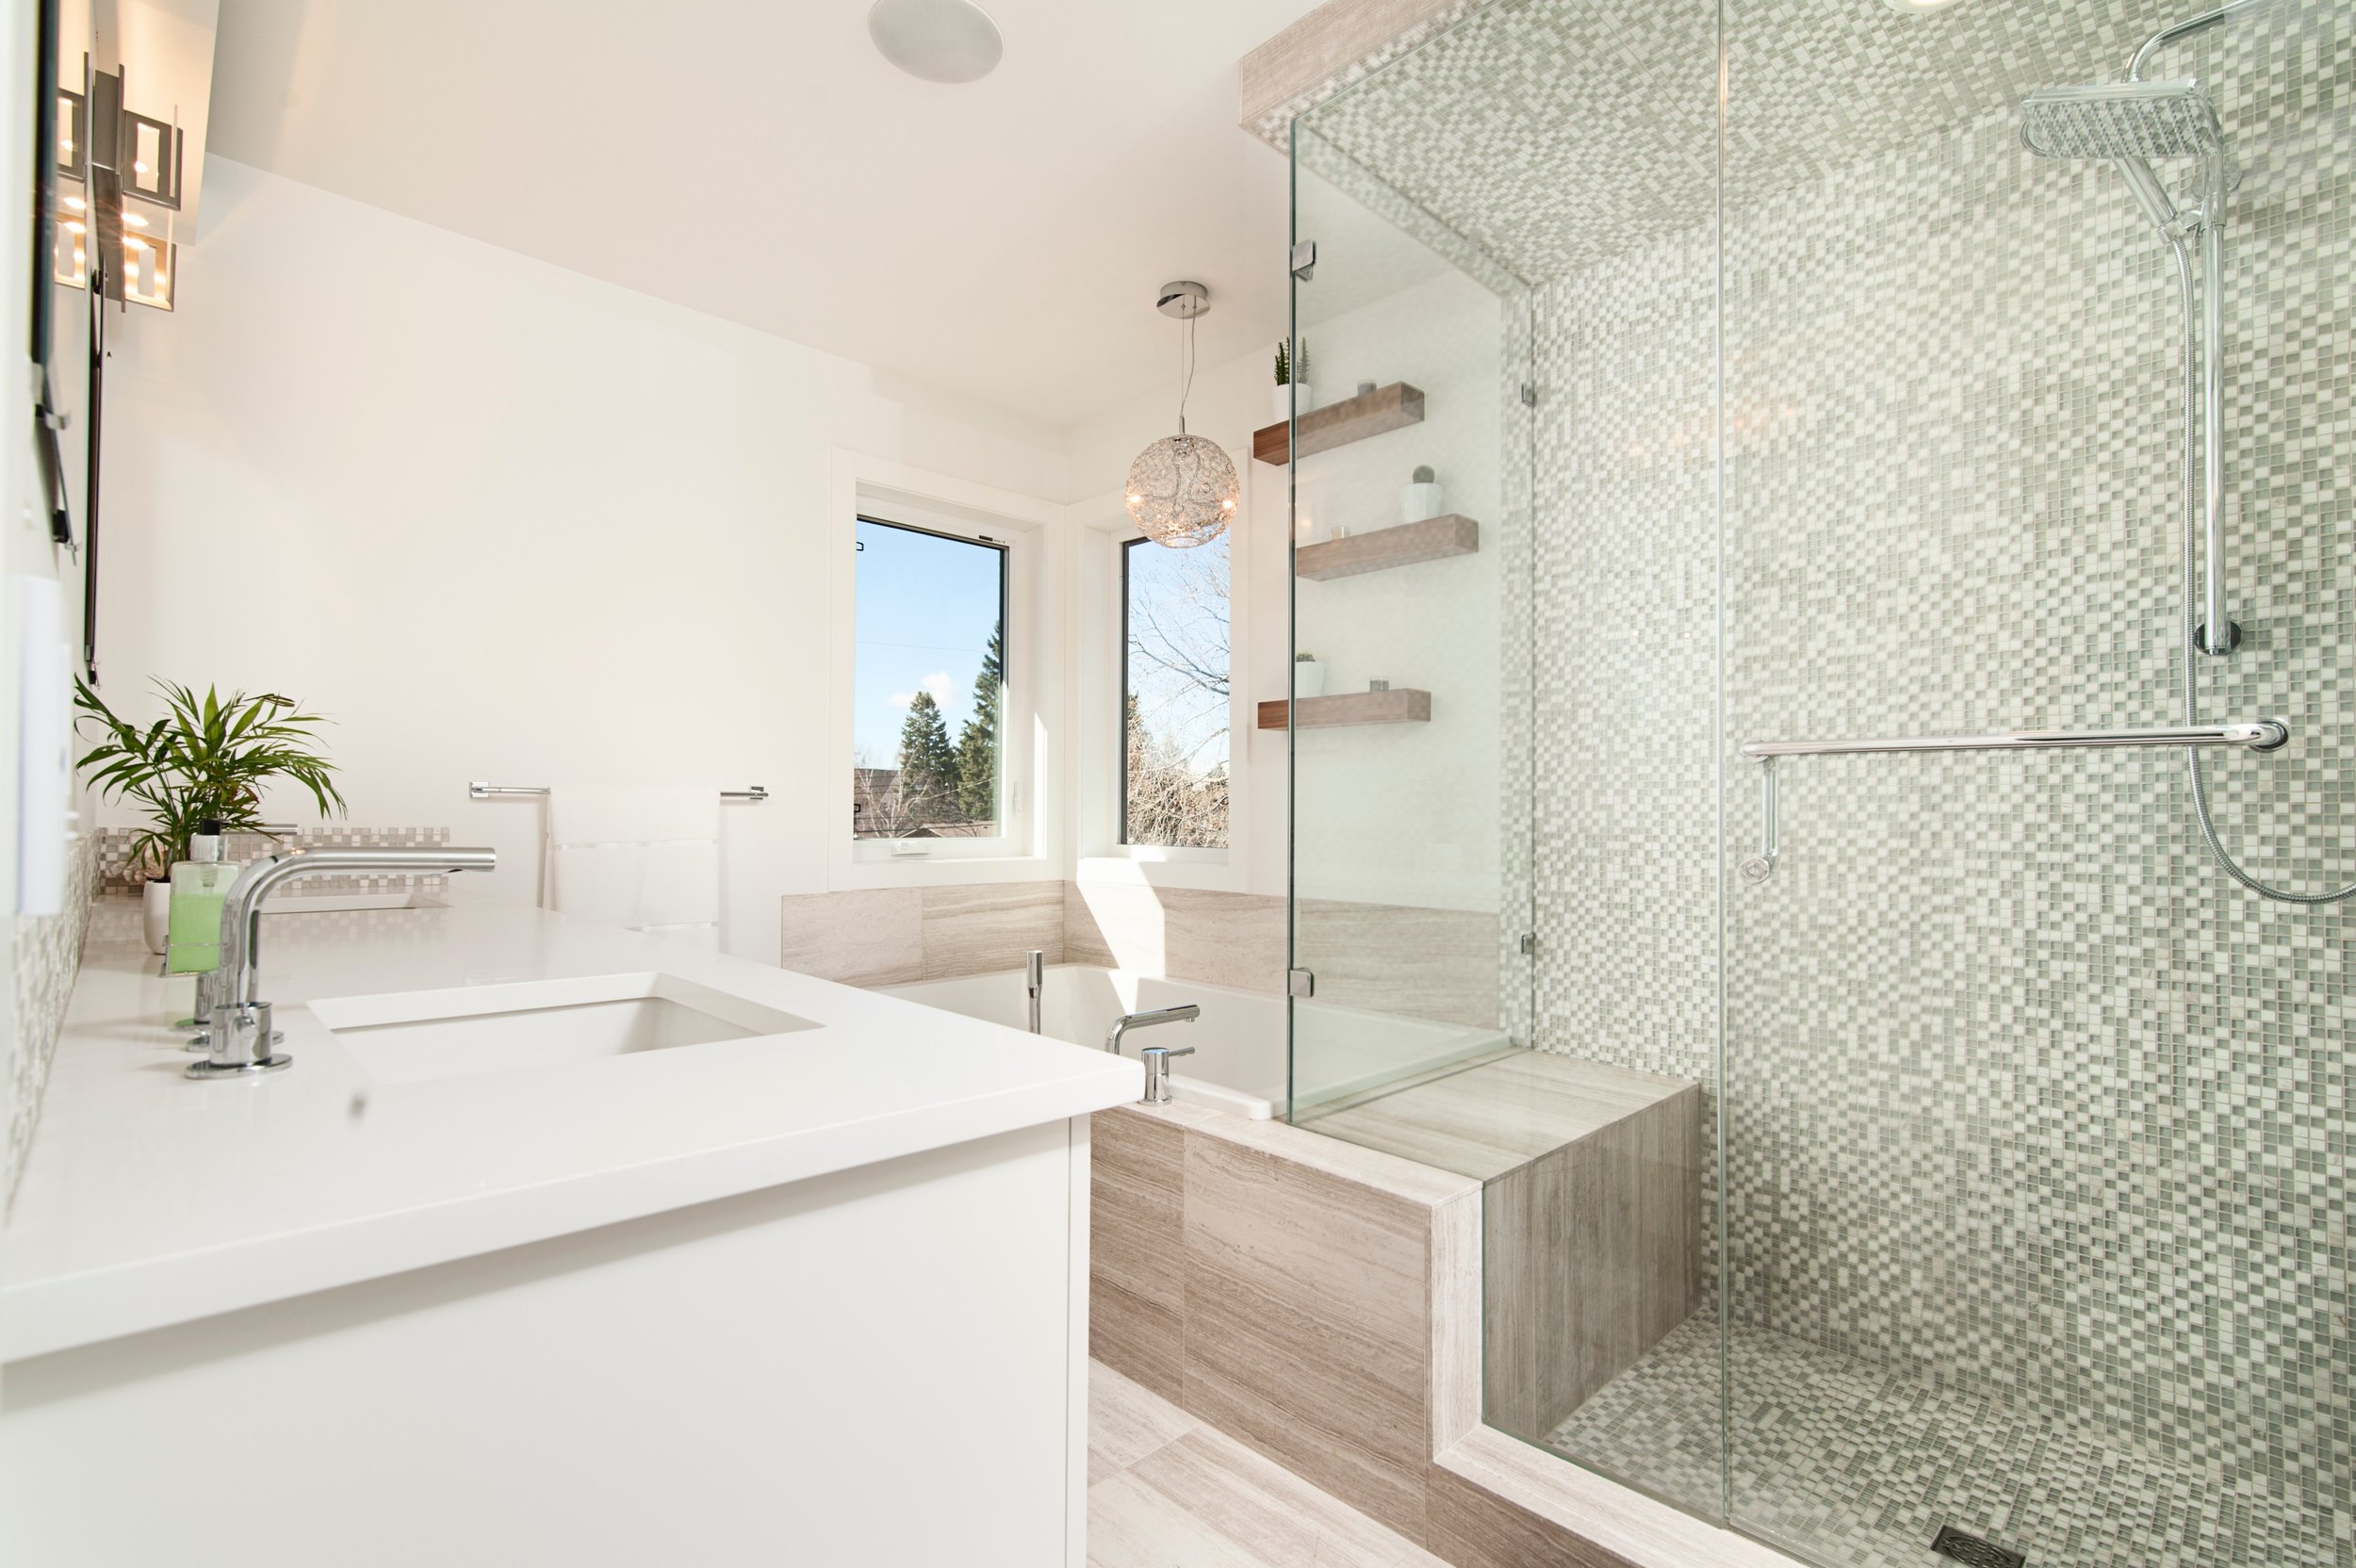 Converting Your Tub To A Walk In Shower, Bathtub To Walk In Shower Conversion Cost